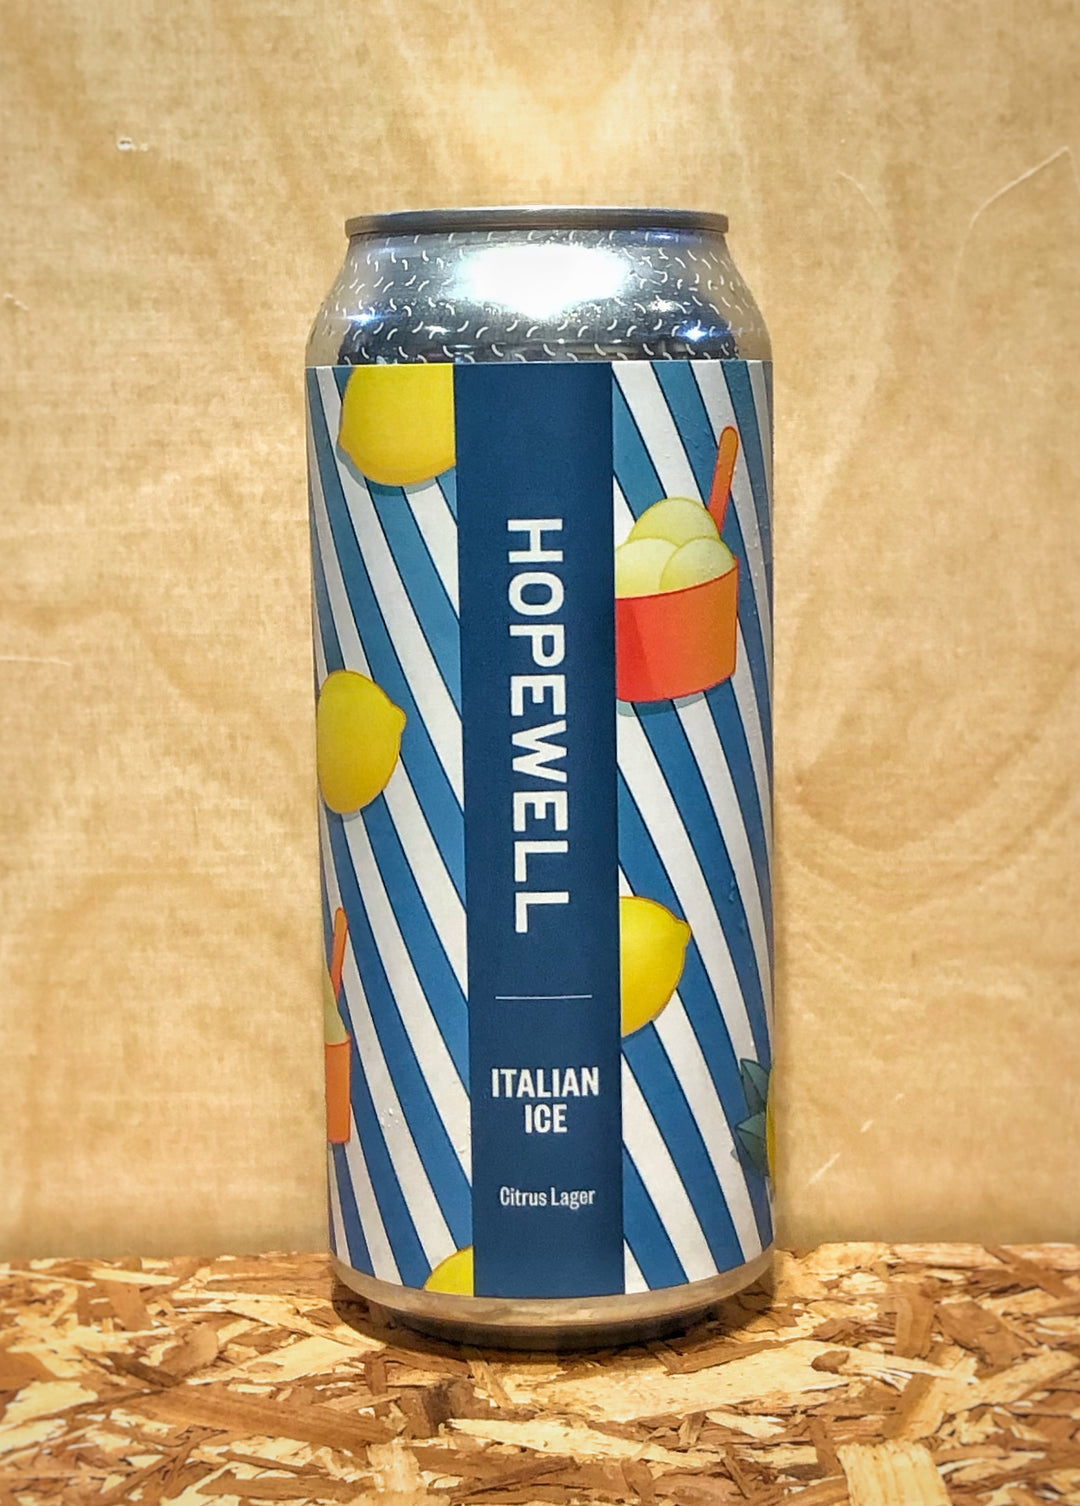 Hopewell 'Italian Ice' Citrus Lager (Chicago, IL)